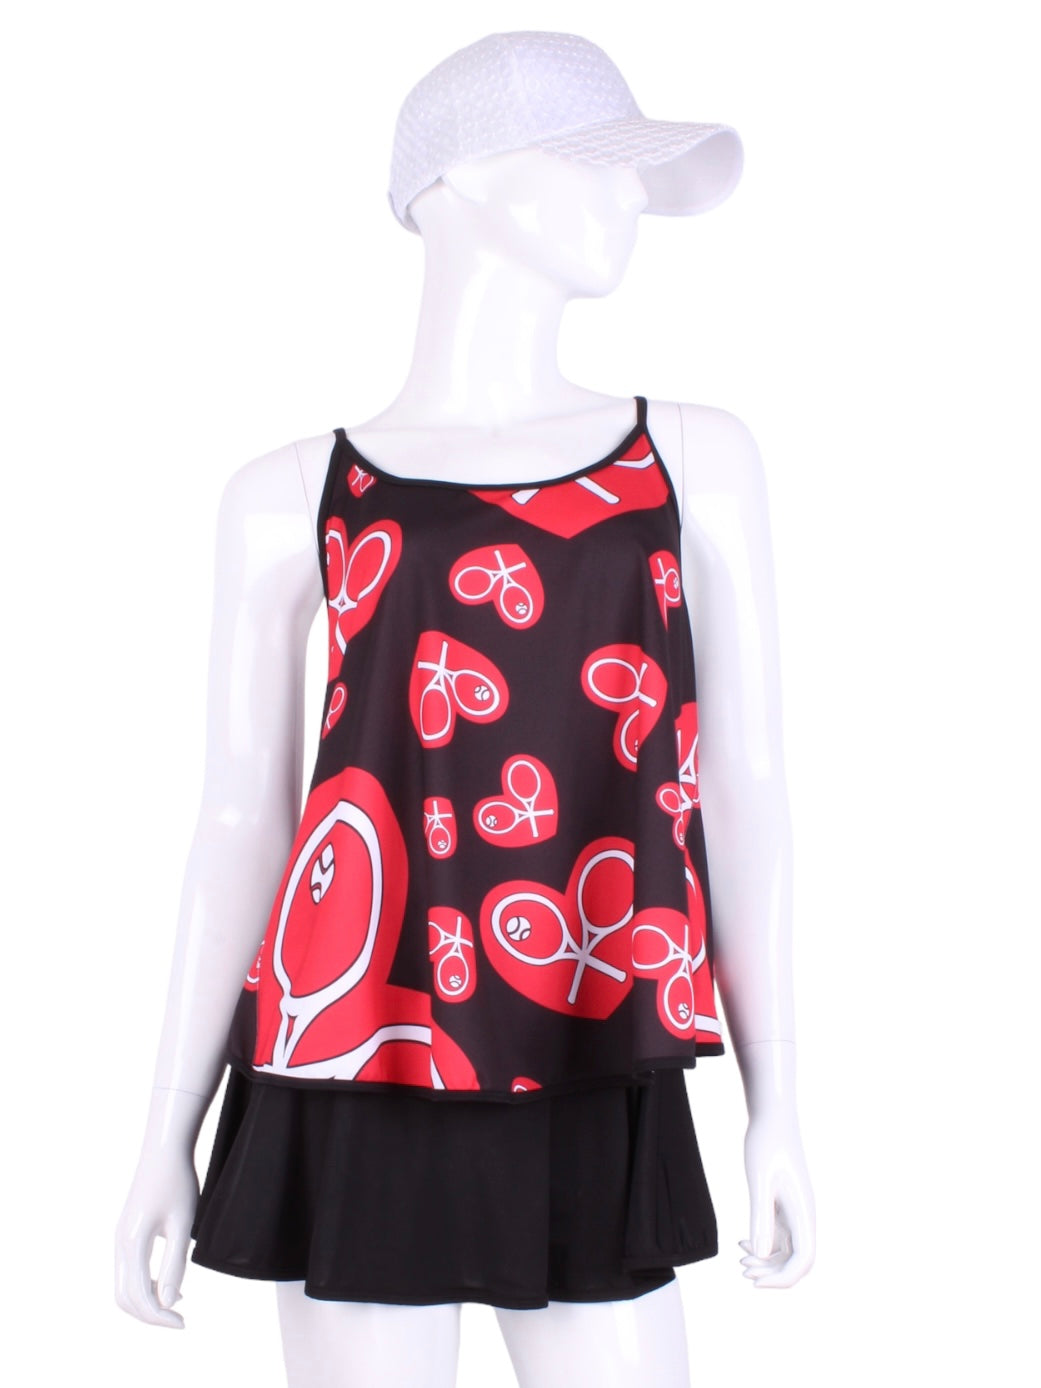 Baggy Tank Tennis Top Red Heart A cool and flowy Baggy Tank tennis top for ultimate comfort.  A deep scoop neckline front and strappy high back with two-needle cover stitch at each seam.   Smooth black binding finishes the edges.